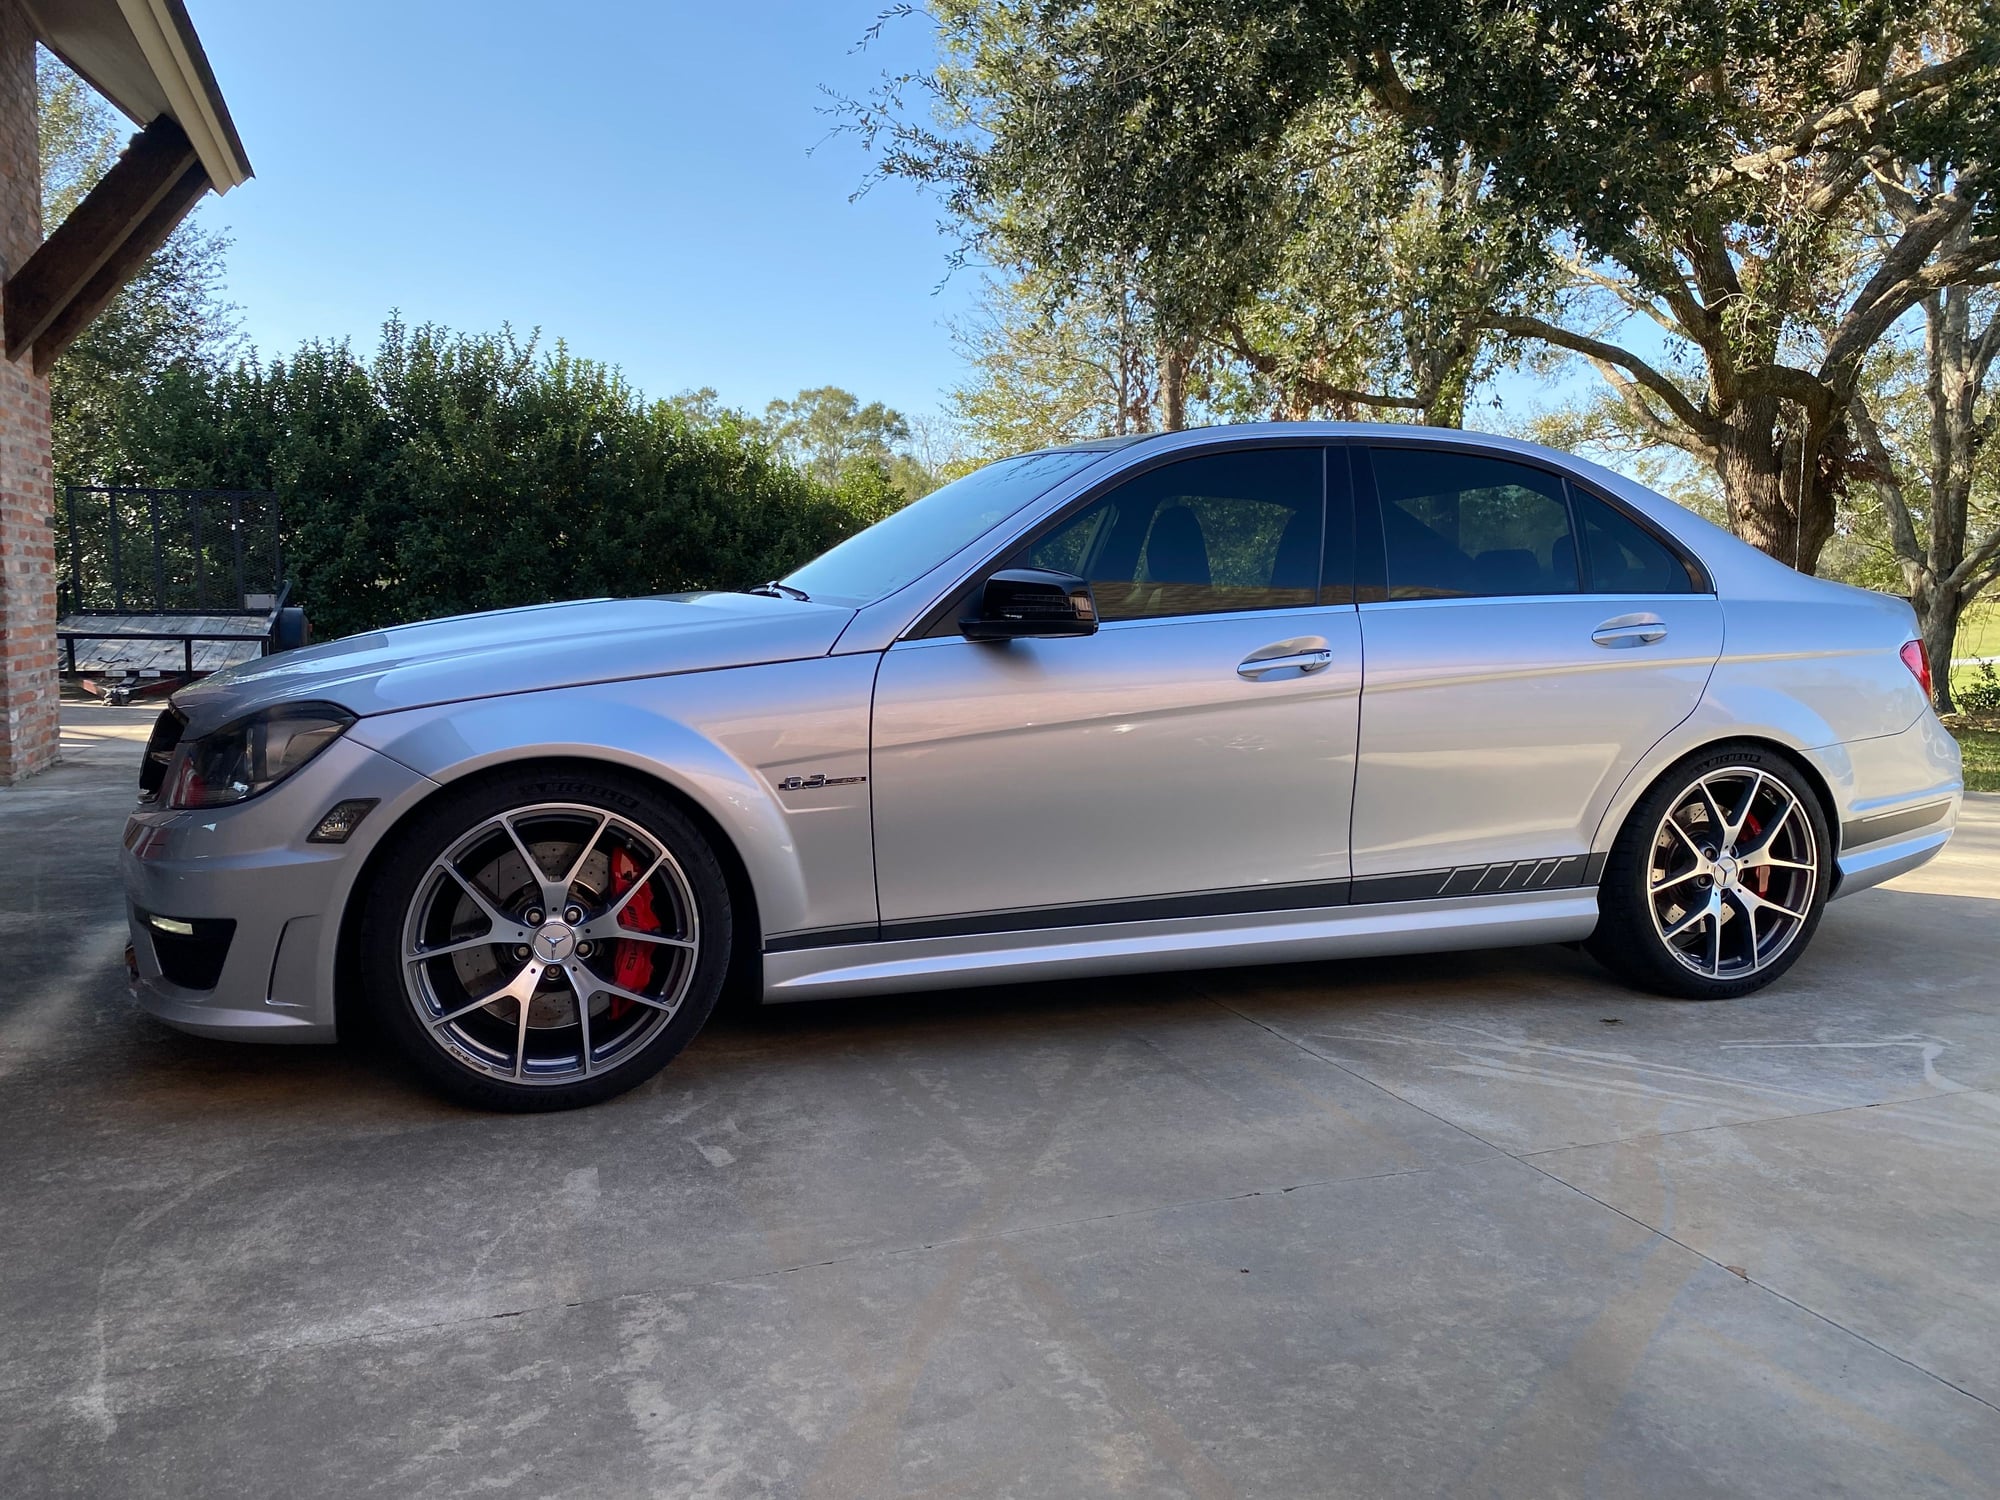 14 Mercedes Benz C63 Amg Edition 507 Sedan Weistec Stage Ii Supercharged Mbworld Org Forums